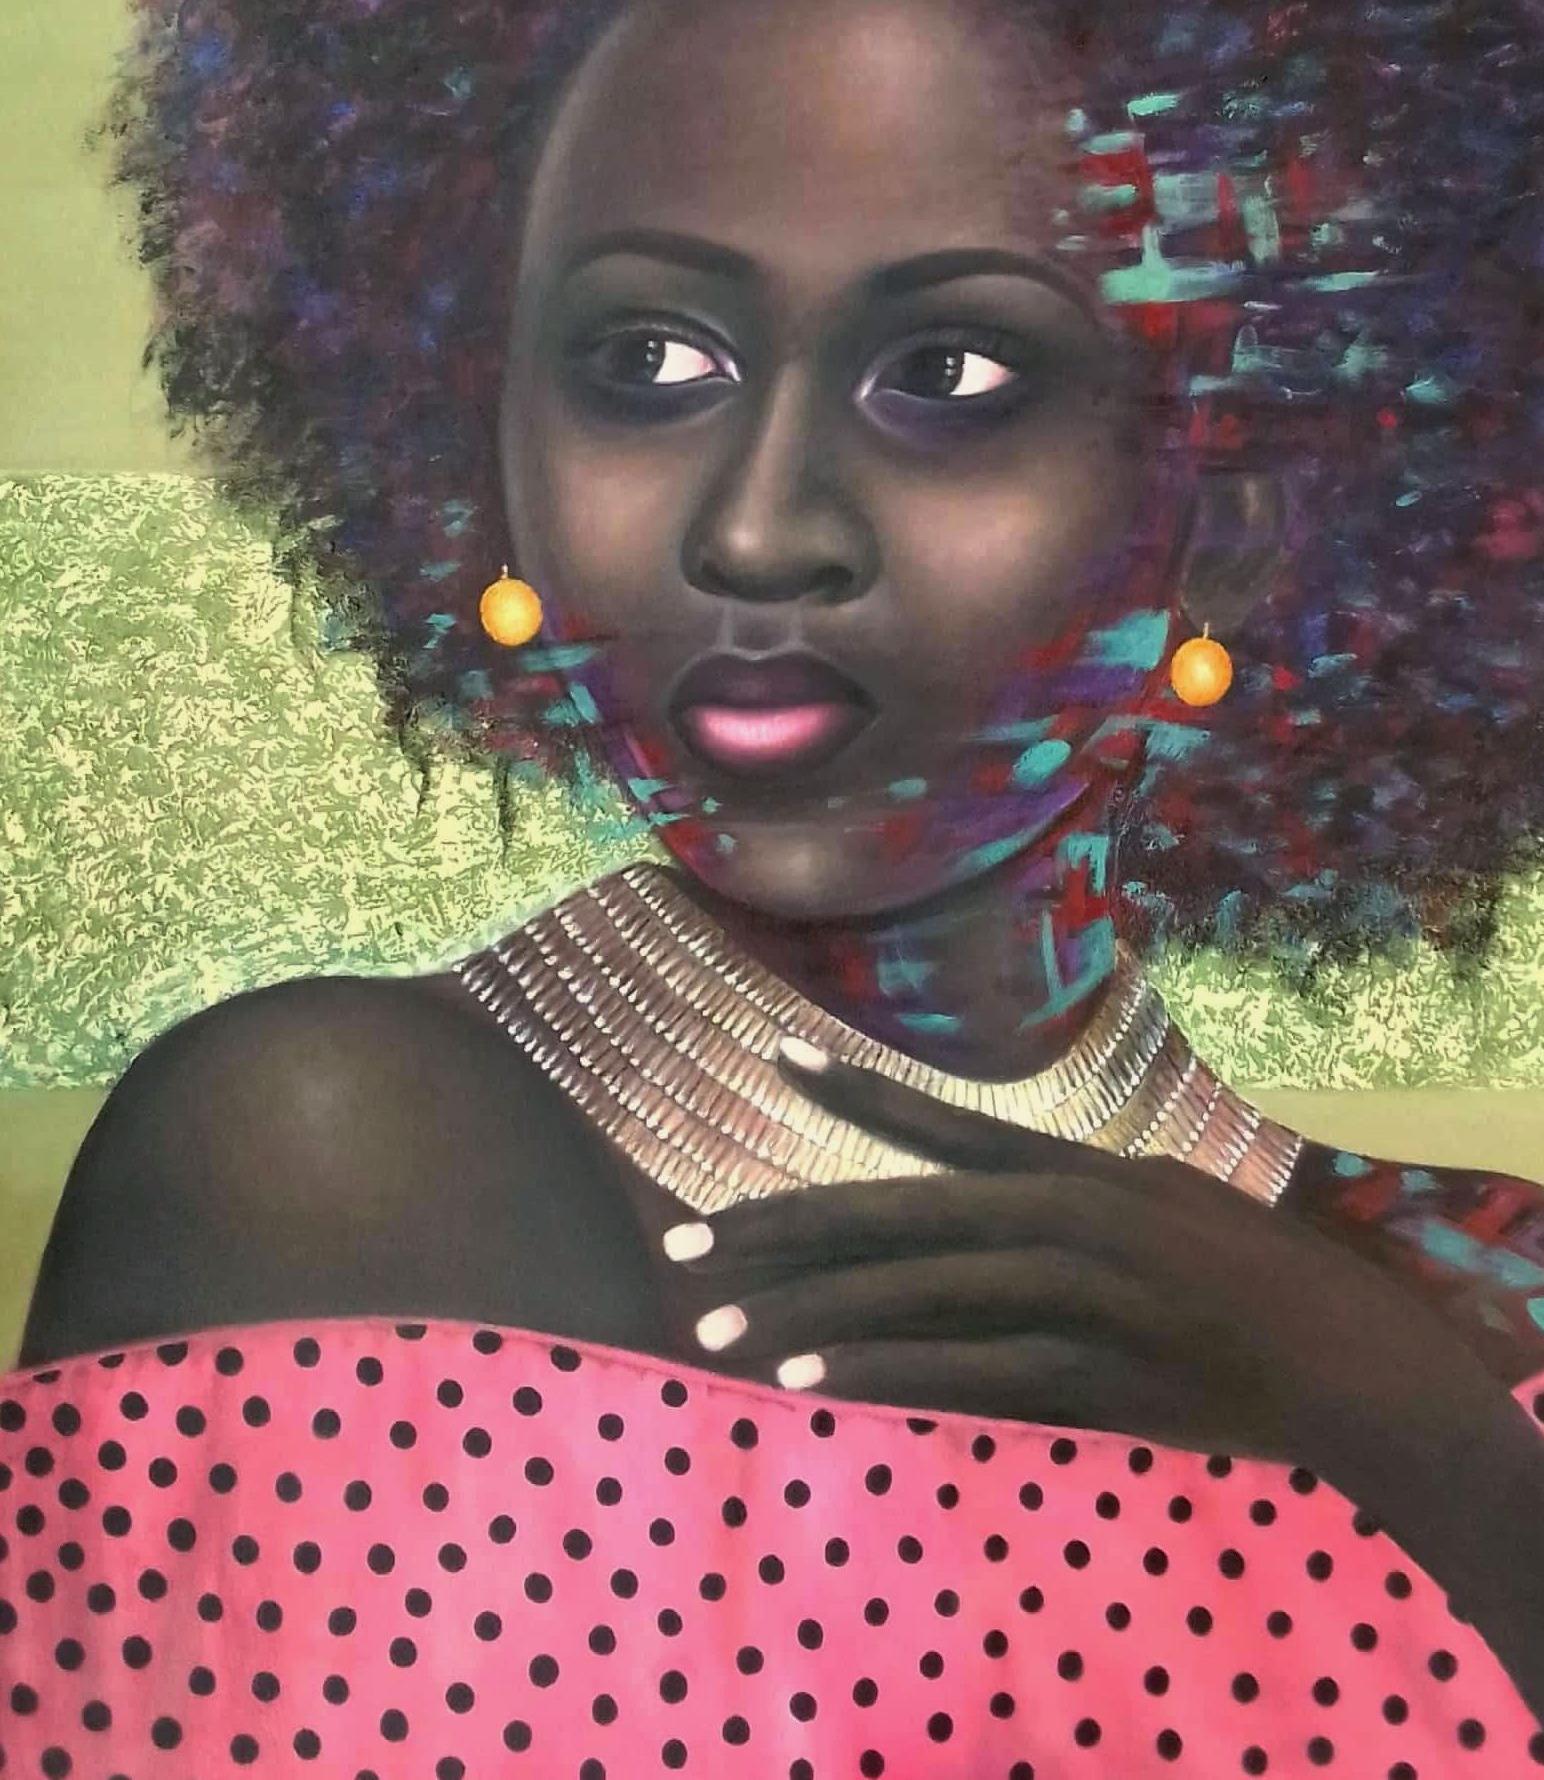 Bimbo is a painting by Chima Theophilus, depicting a young lady with a pink dress and afro hair.
Abimbola (a diminutive form of Bimbo) is a Yoruba given name meaning BORN WITH WEALTH.
Chima dived into the world of black skin of the black race to